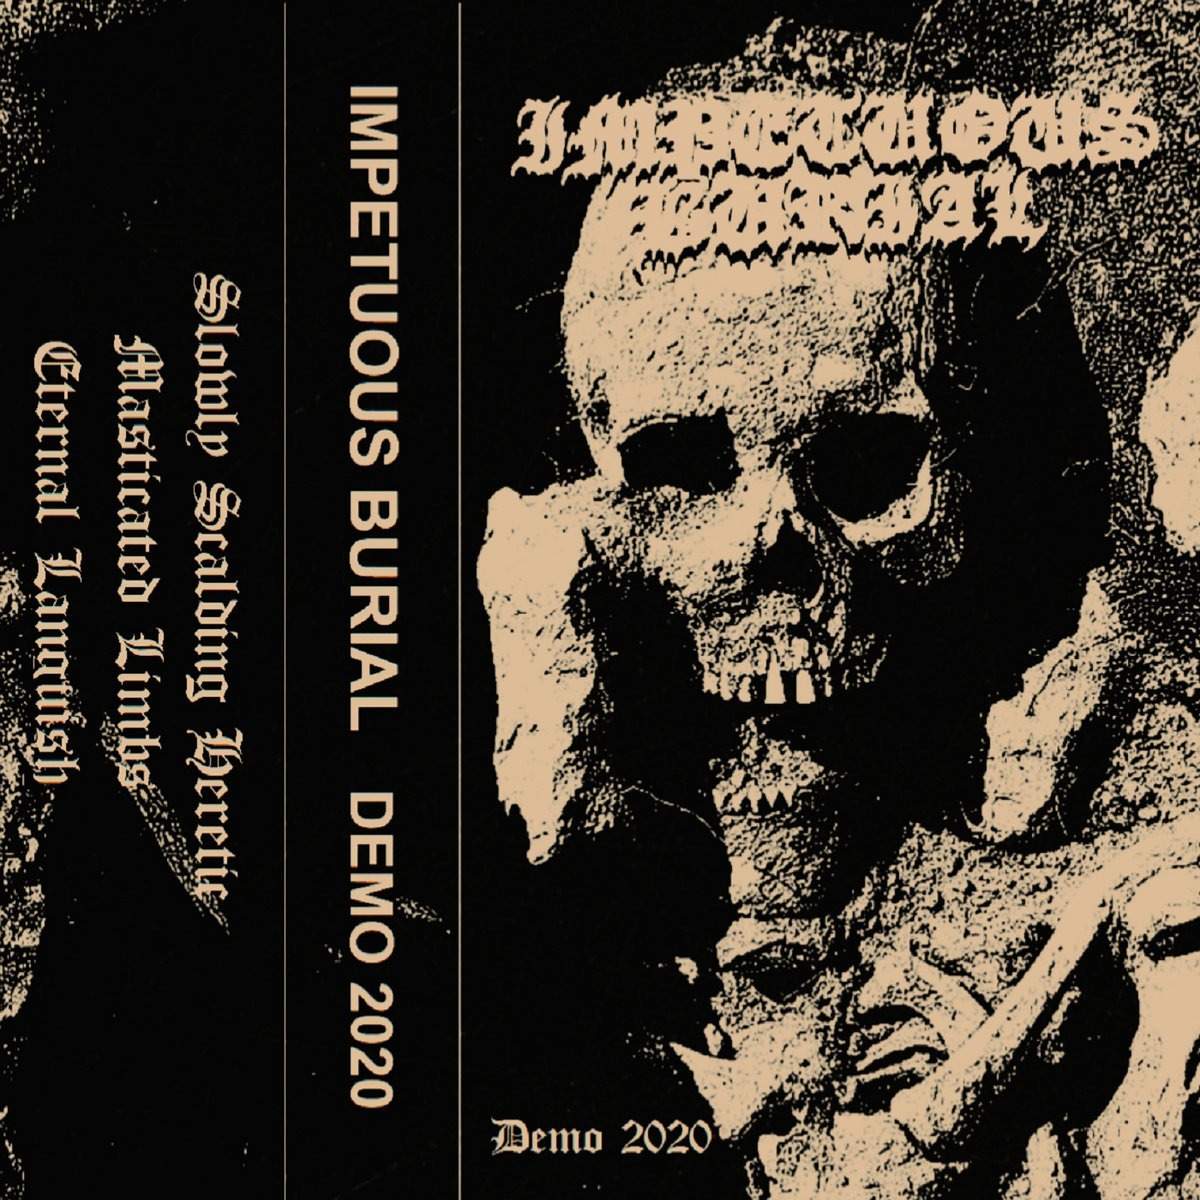 Demo 2020. Impetuous Ritual. Impetuous Rage Metal Band. Hellhammer. Impetuous aterfall.